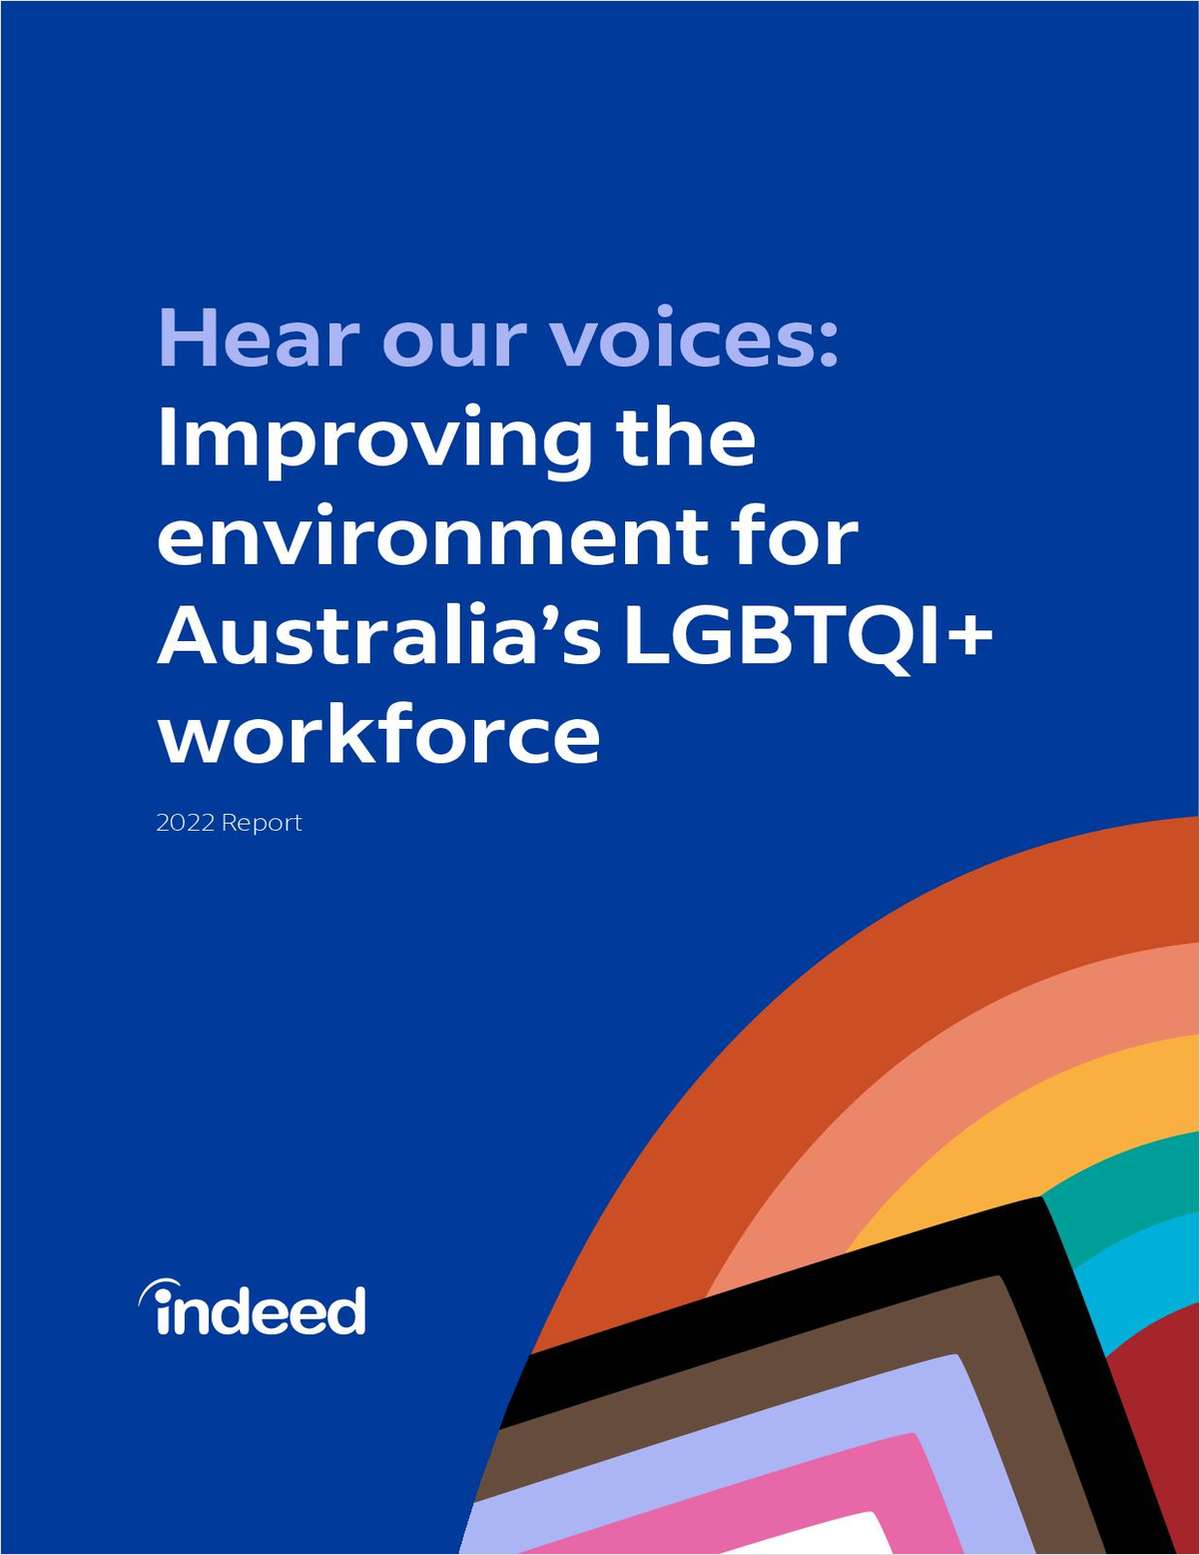 Improving the environment for your LGBTQI+ workforce